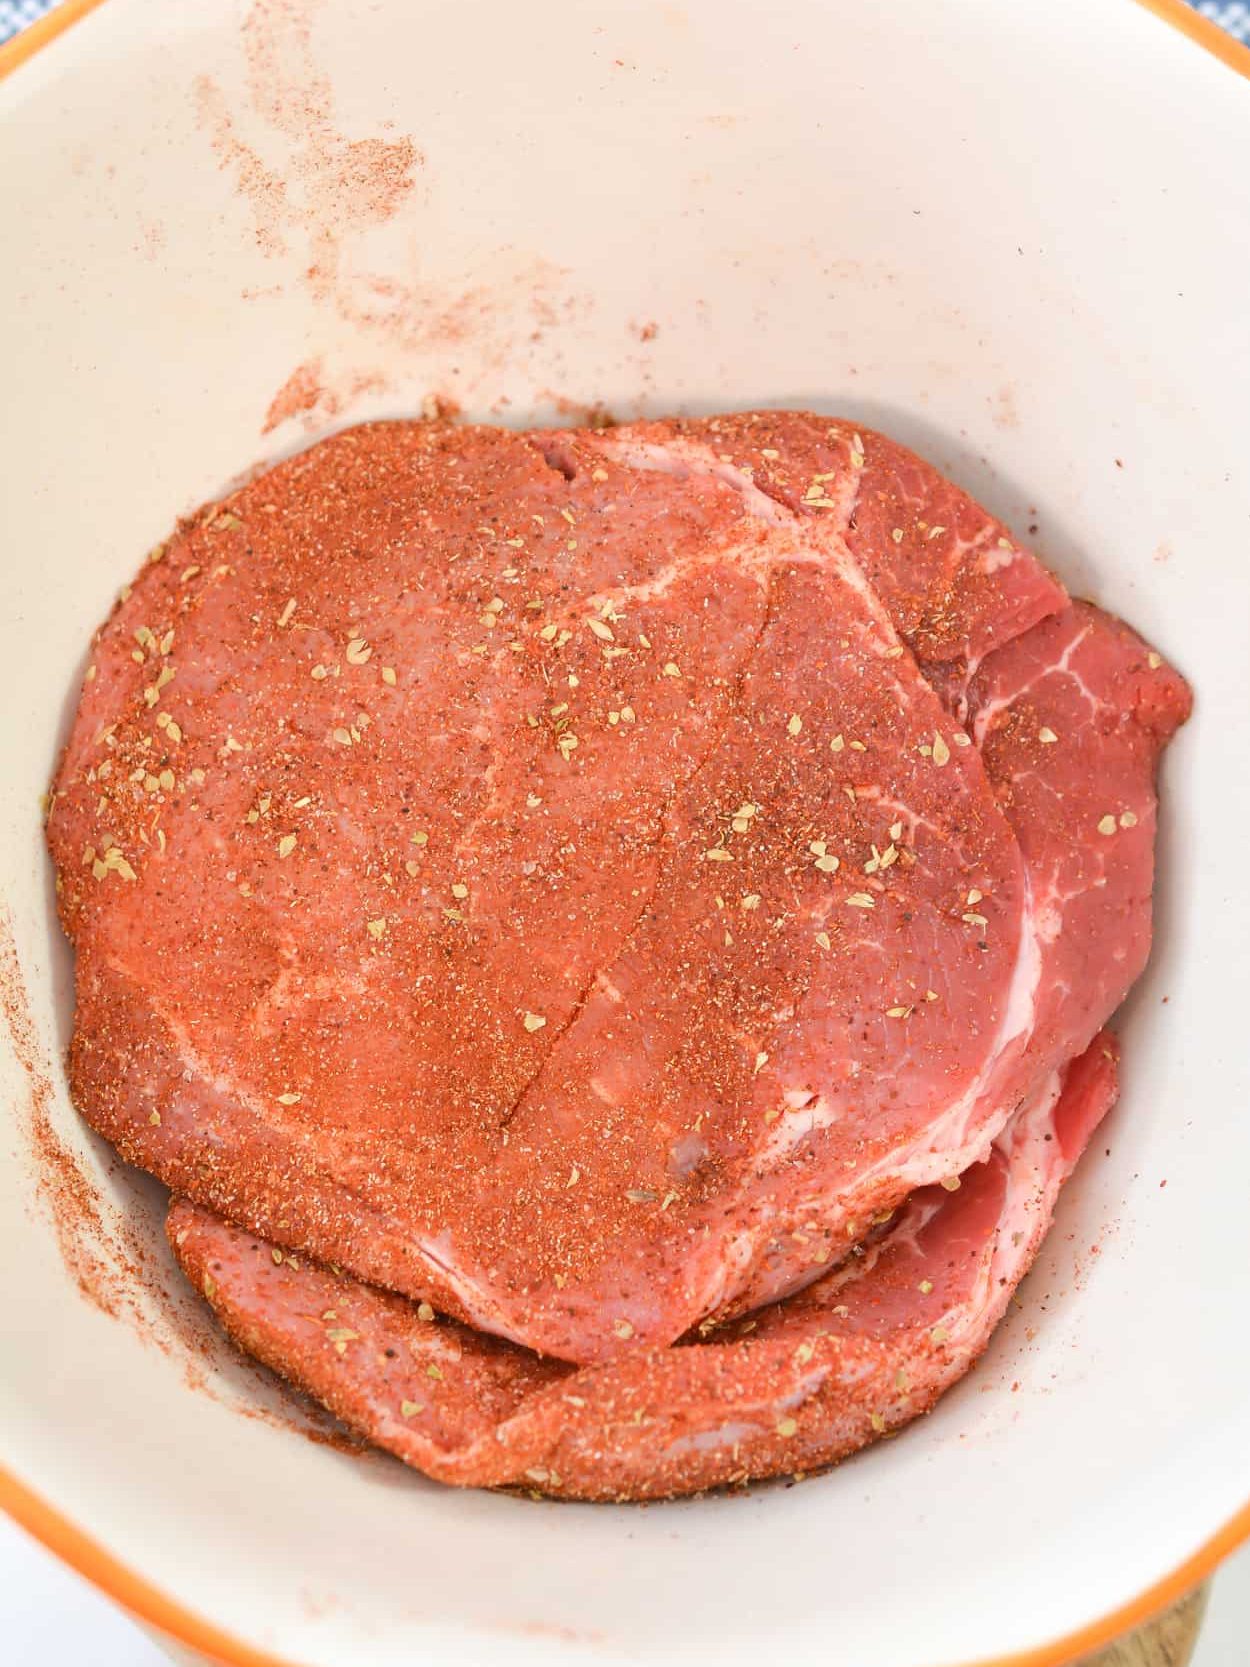 Season the steak with the spice mixture.